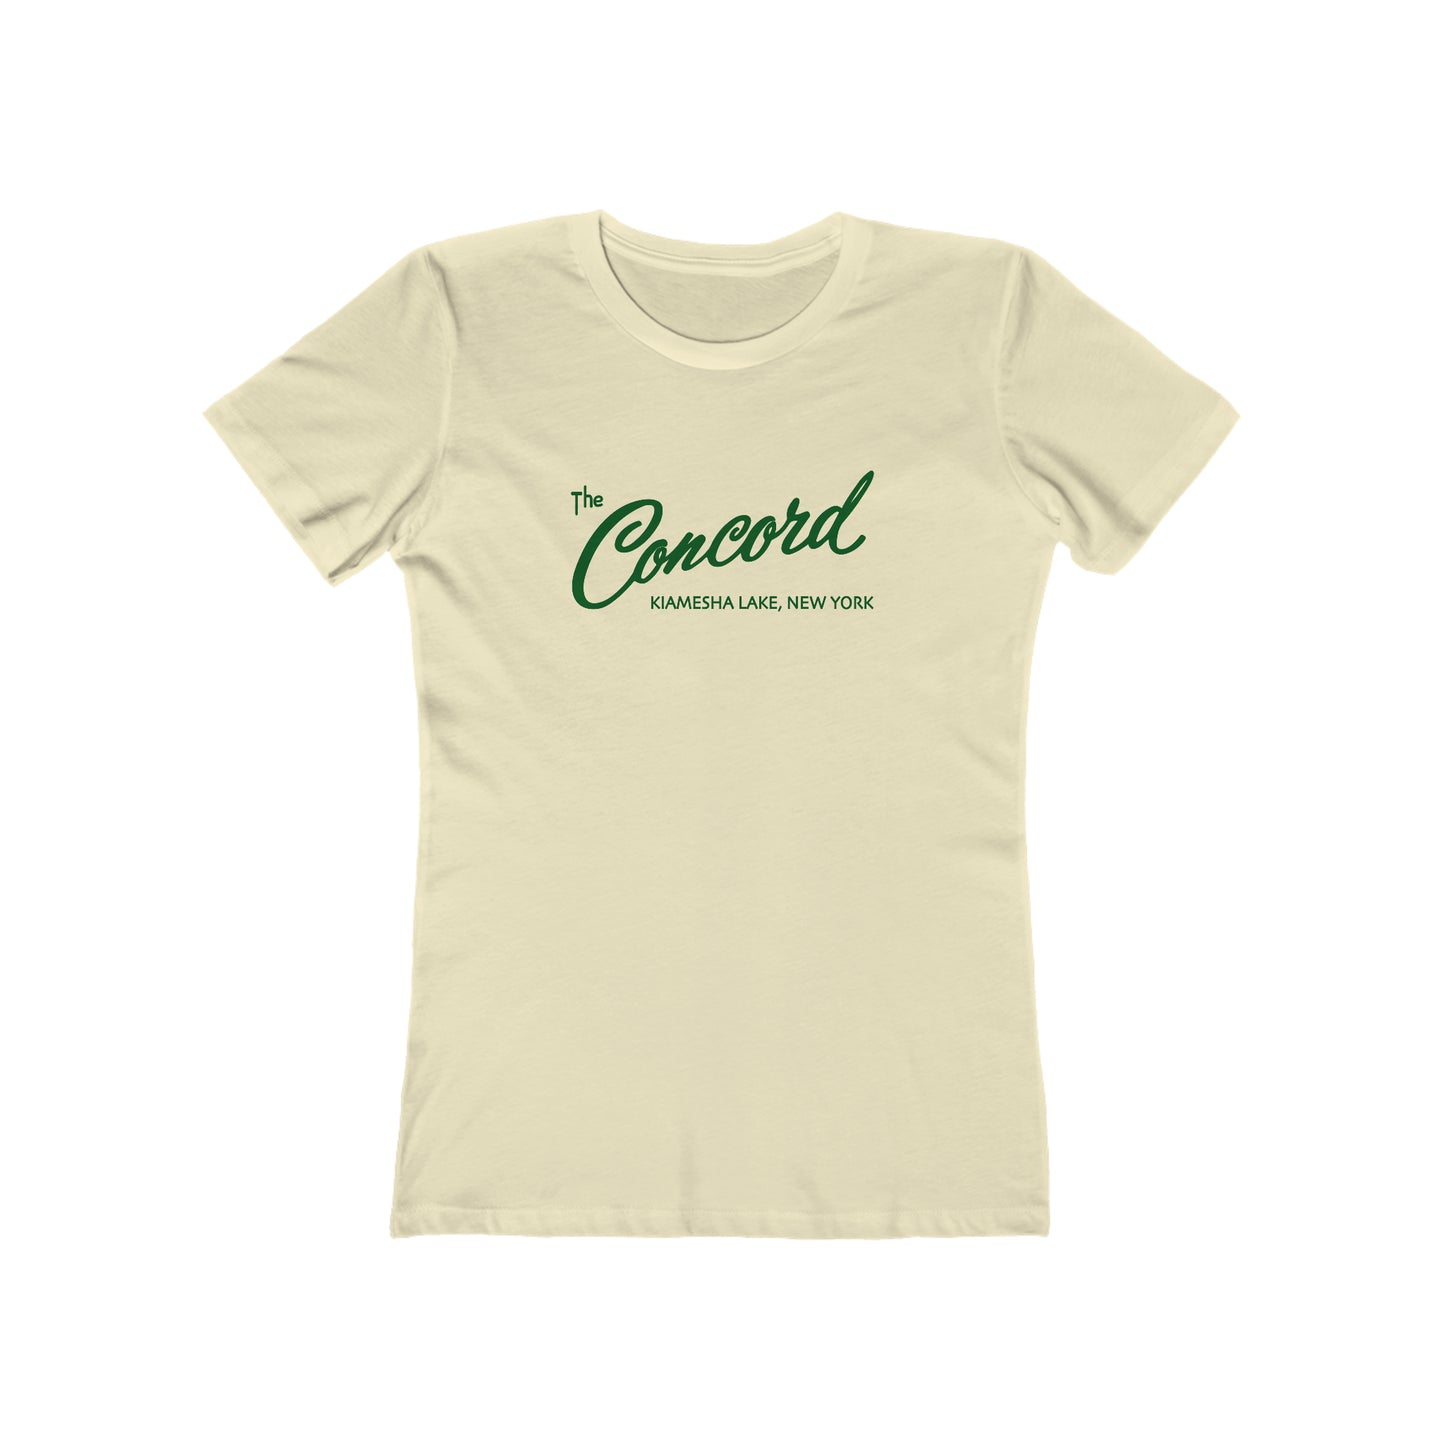 The Concord - Women's T-Shirt